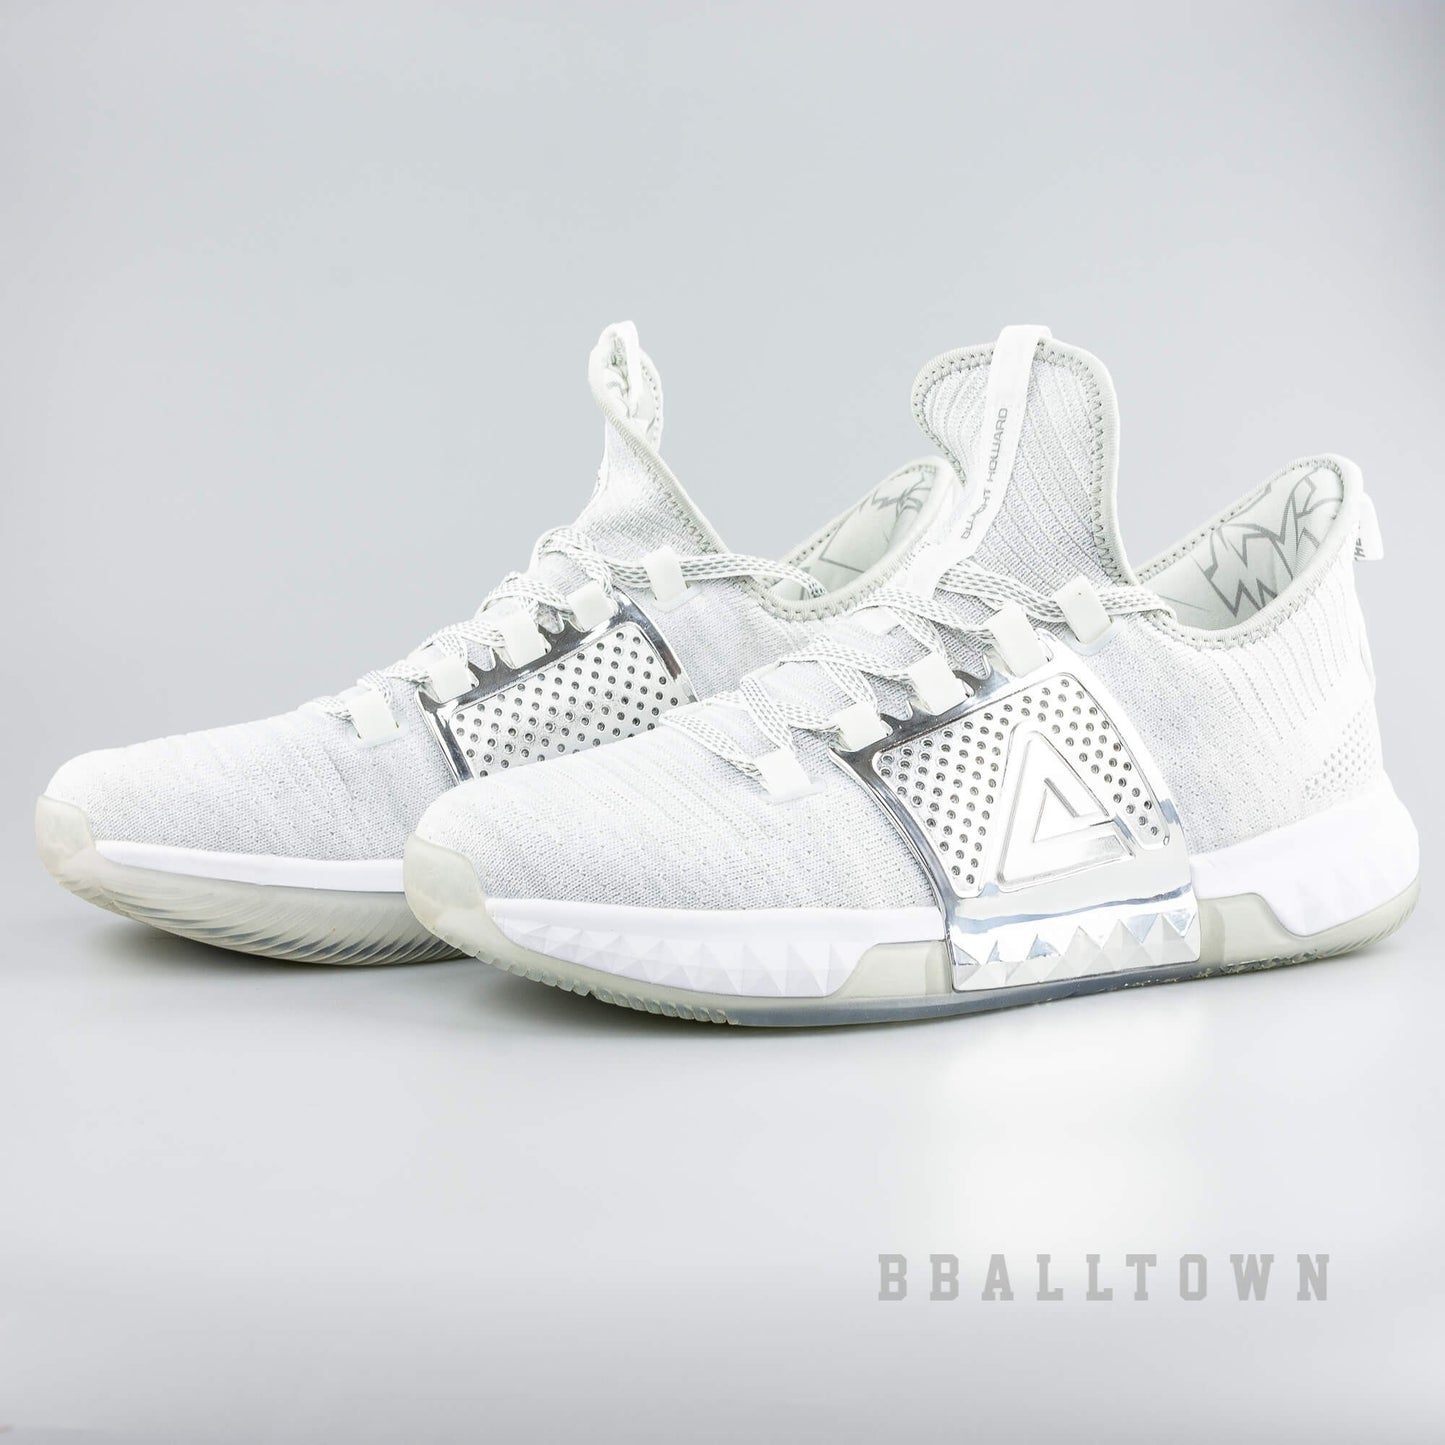 Peak Basketball Shoes Dwight Howard DH3 Low White